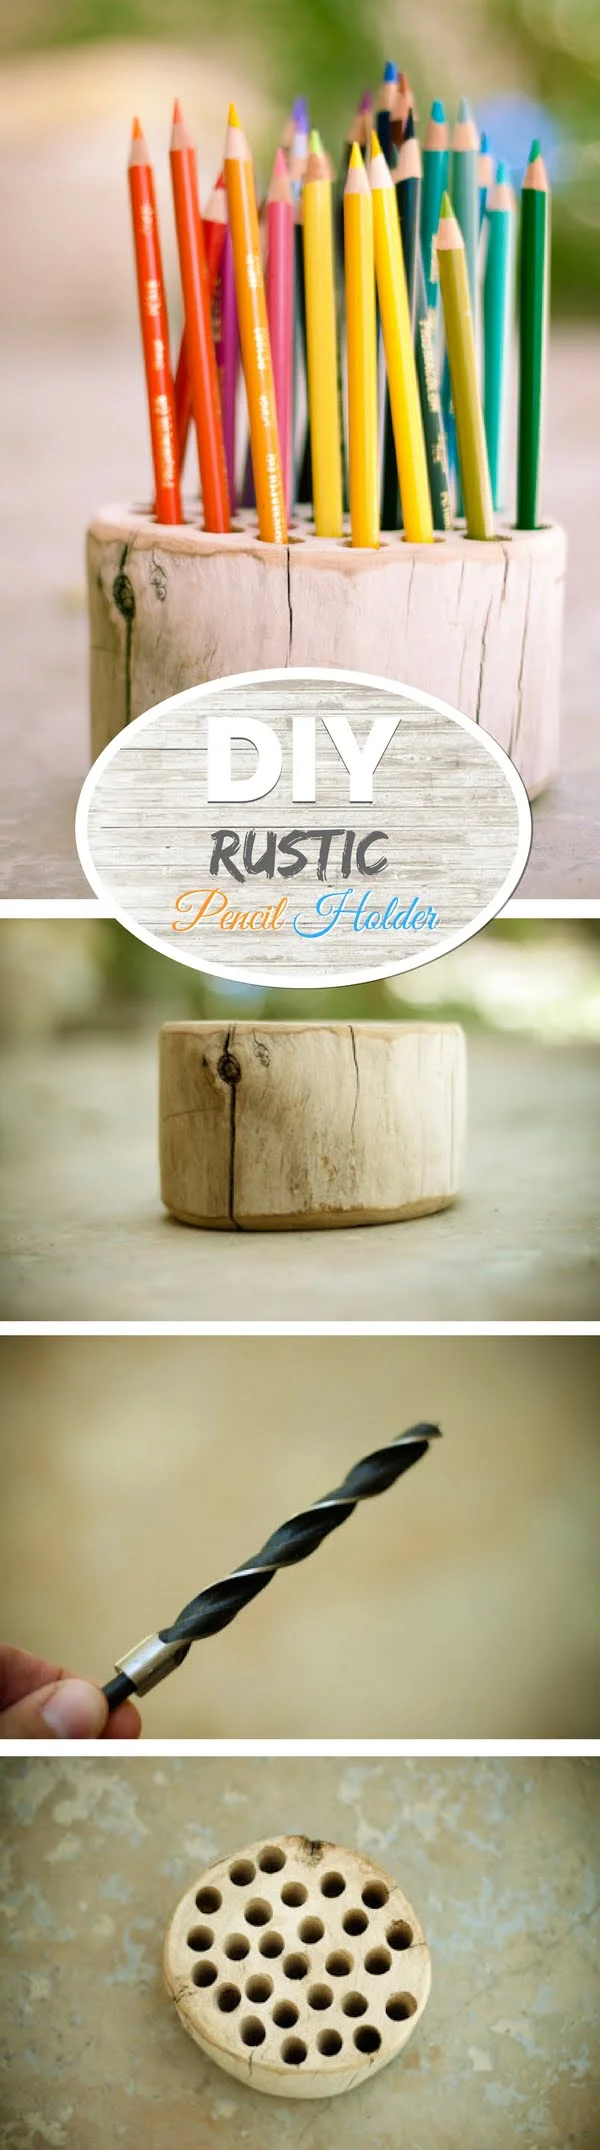 Check out how to make an easy DIY rustic pencil holder